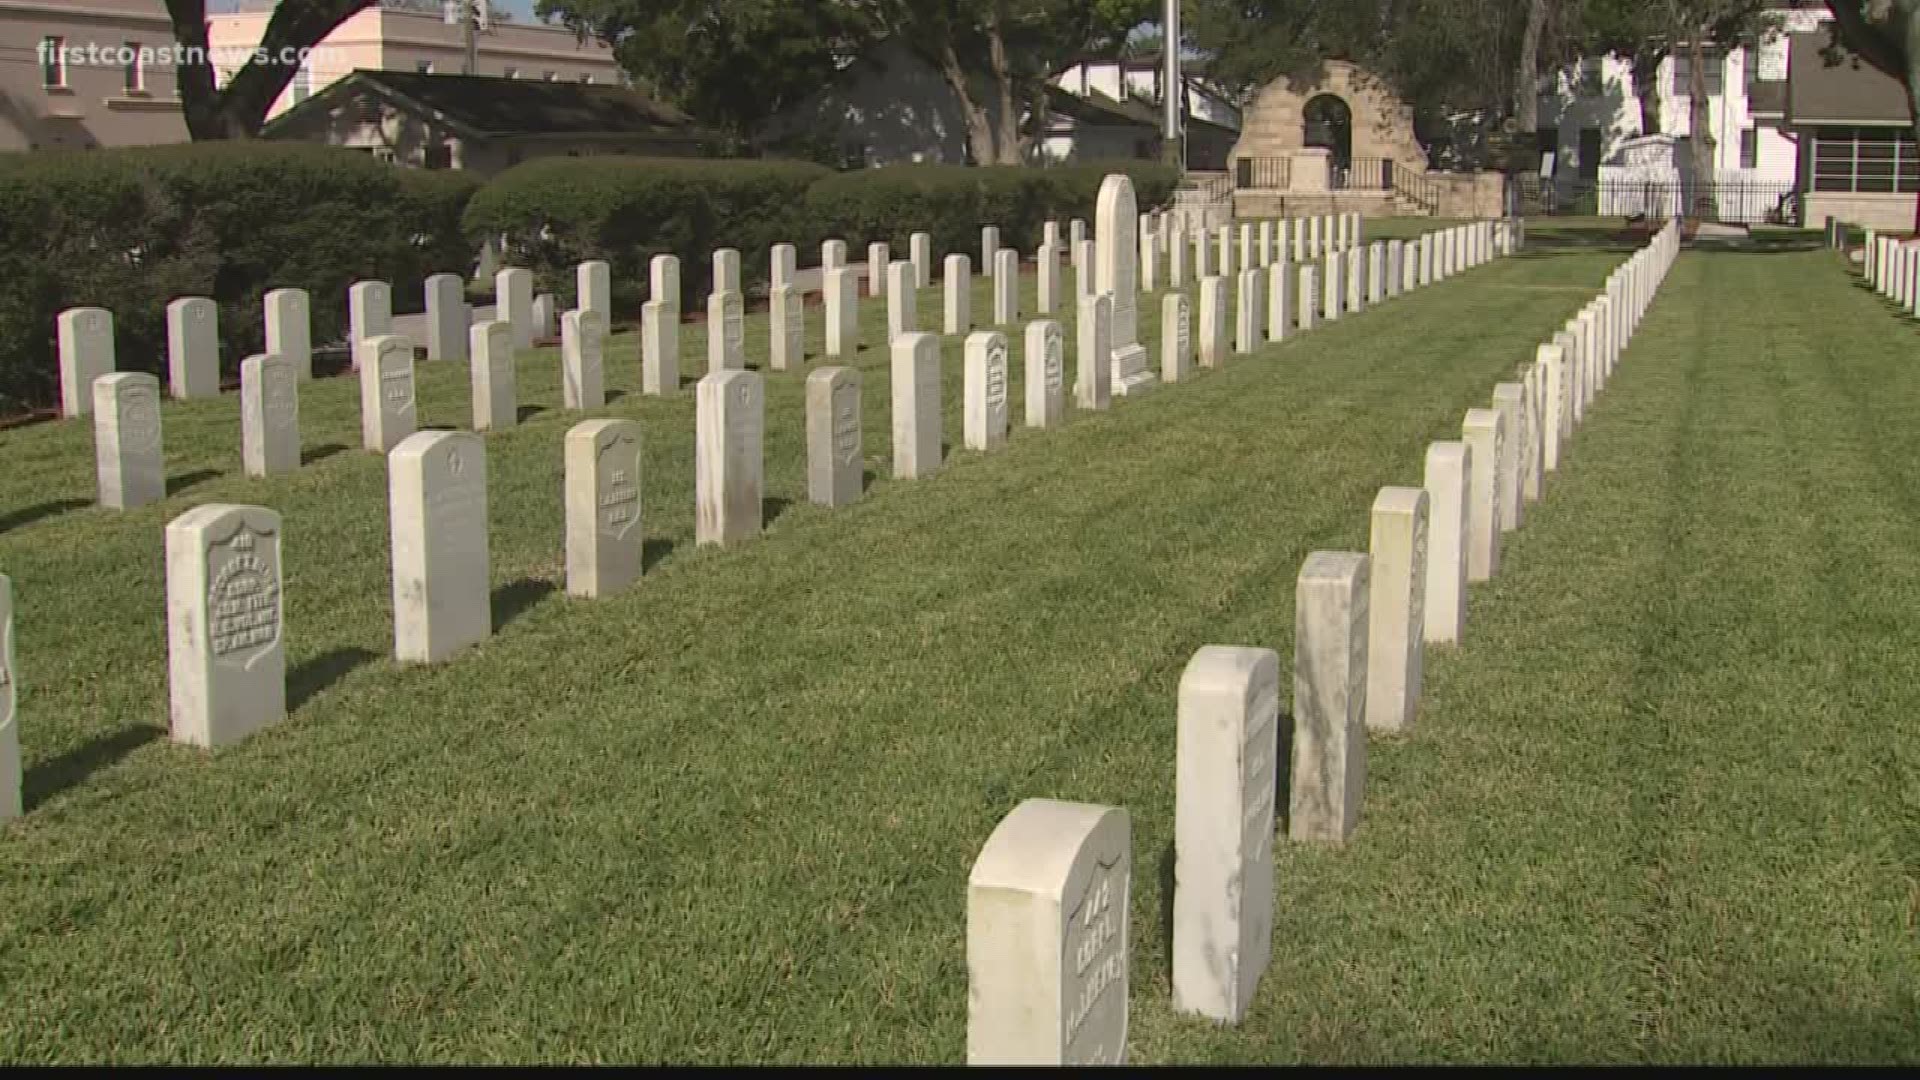 The names carved into the tombstones at the St. Augustine National Cemetery are decades old, but students and staff at the University of Central Florida are making sure the soldiers are not forgotten.